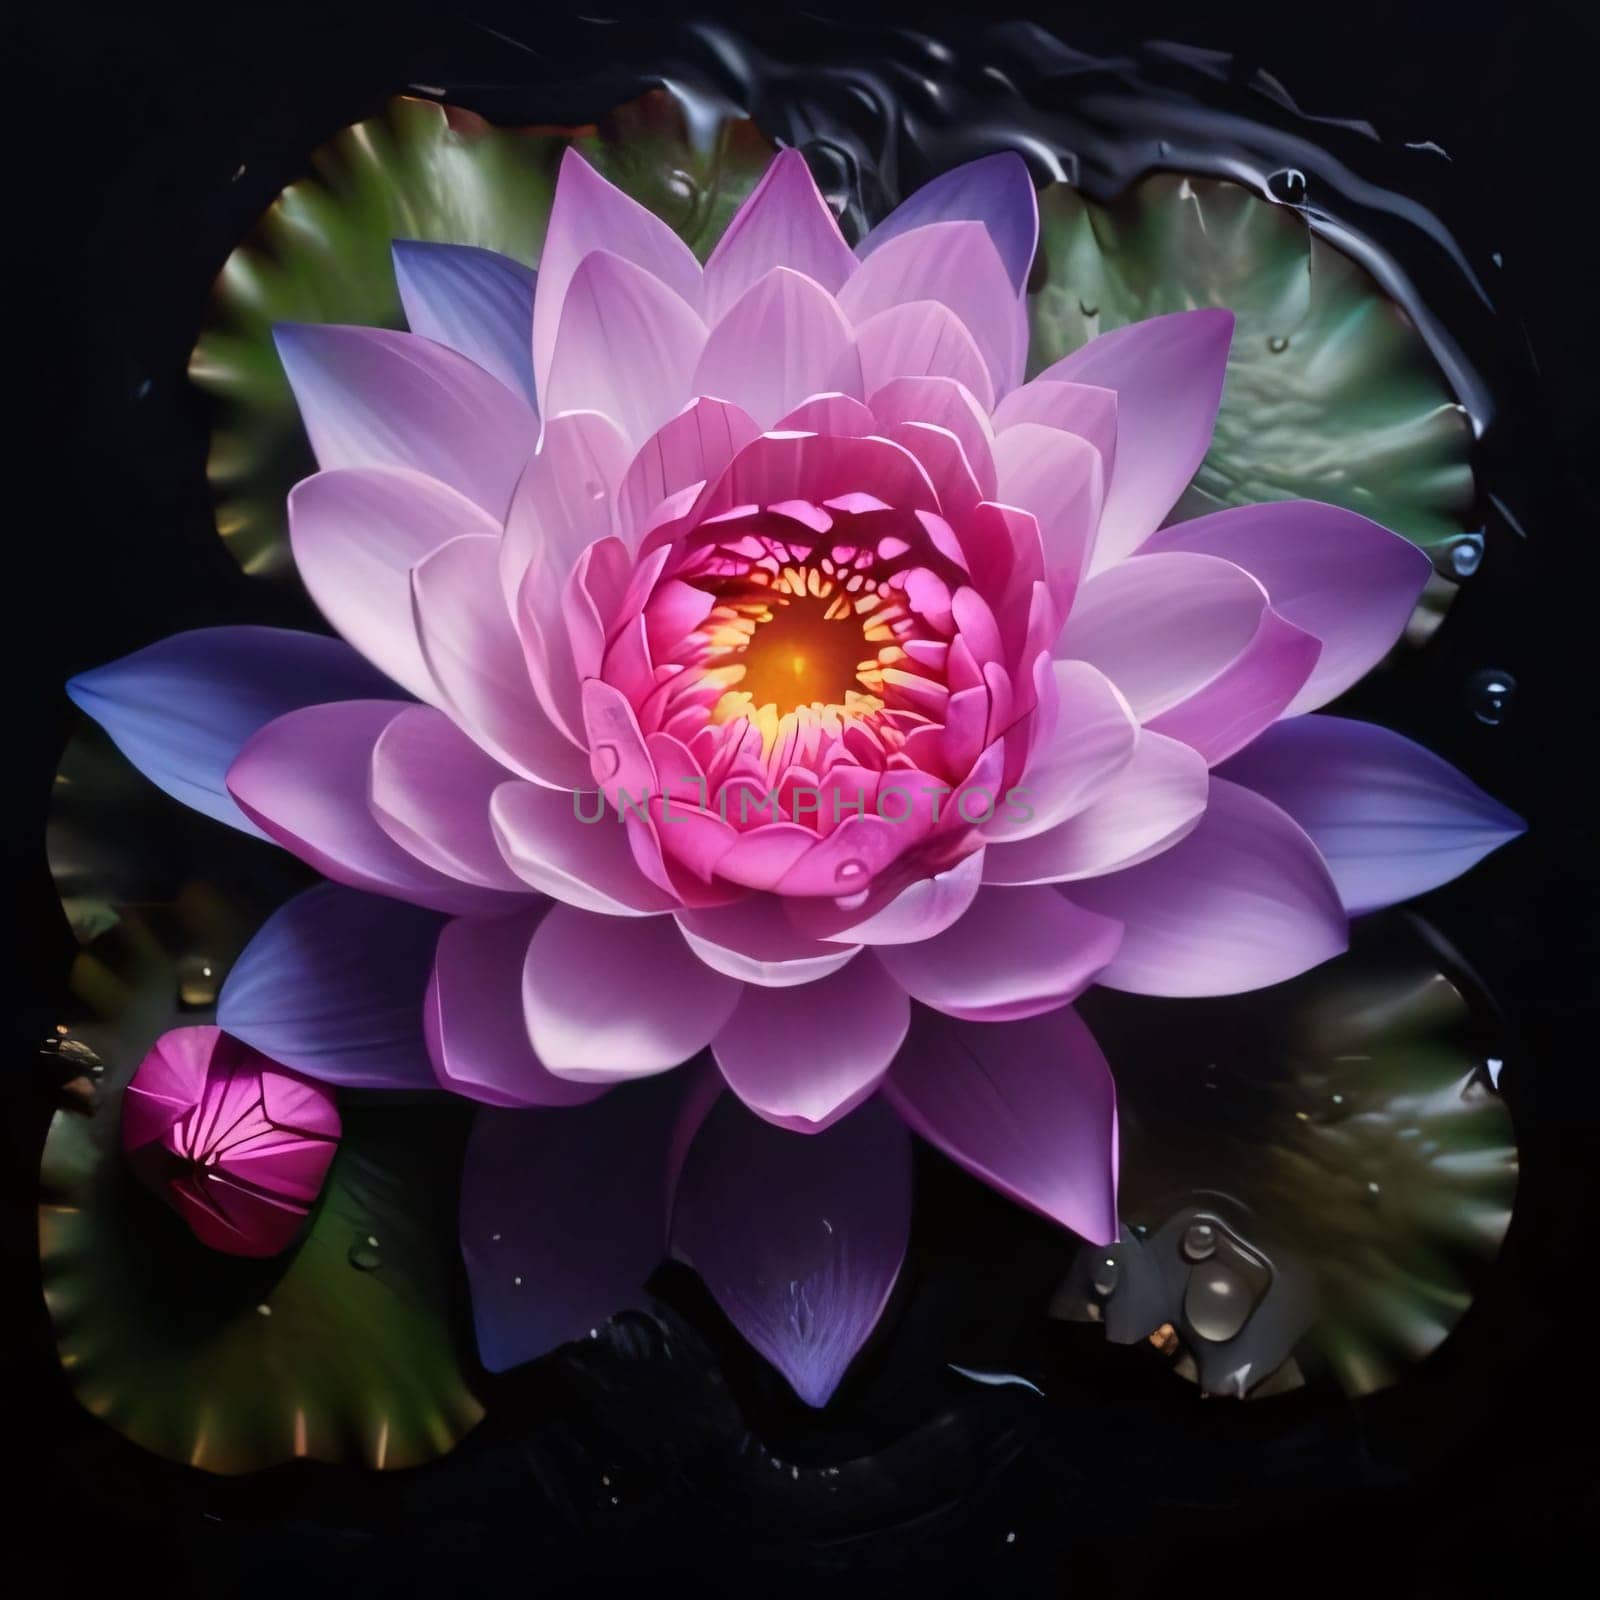 Purple water lily on water, green leaves all around. Flowering flowers, a symbol of spring, new life. by ThemesS